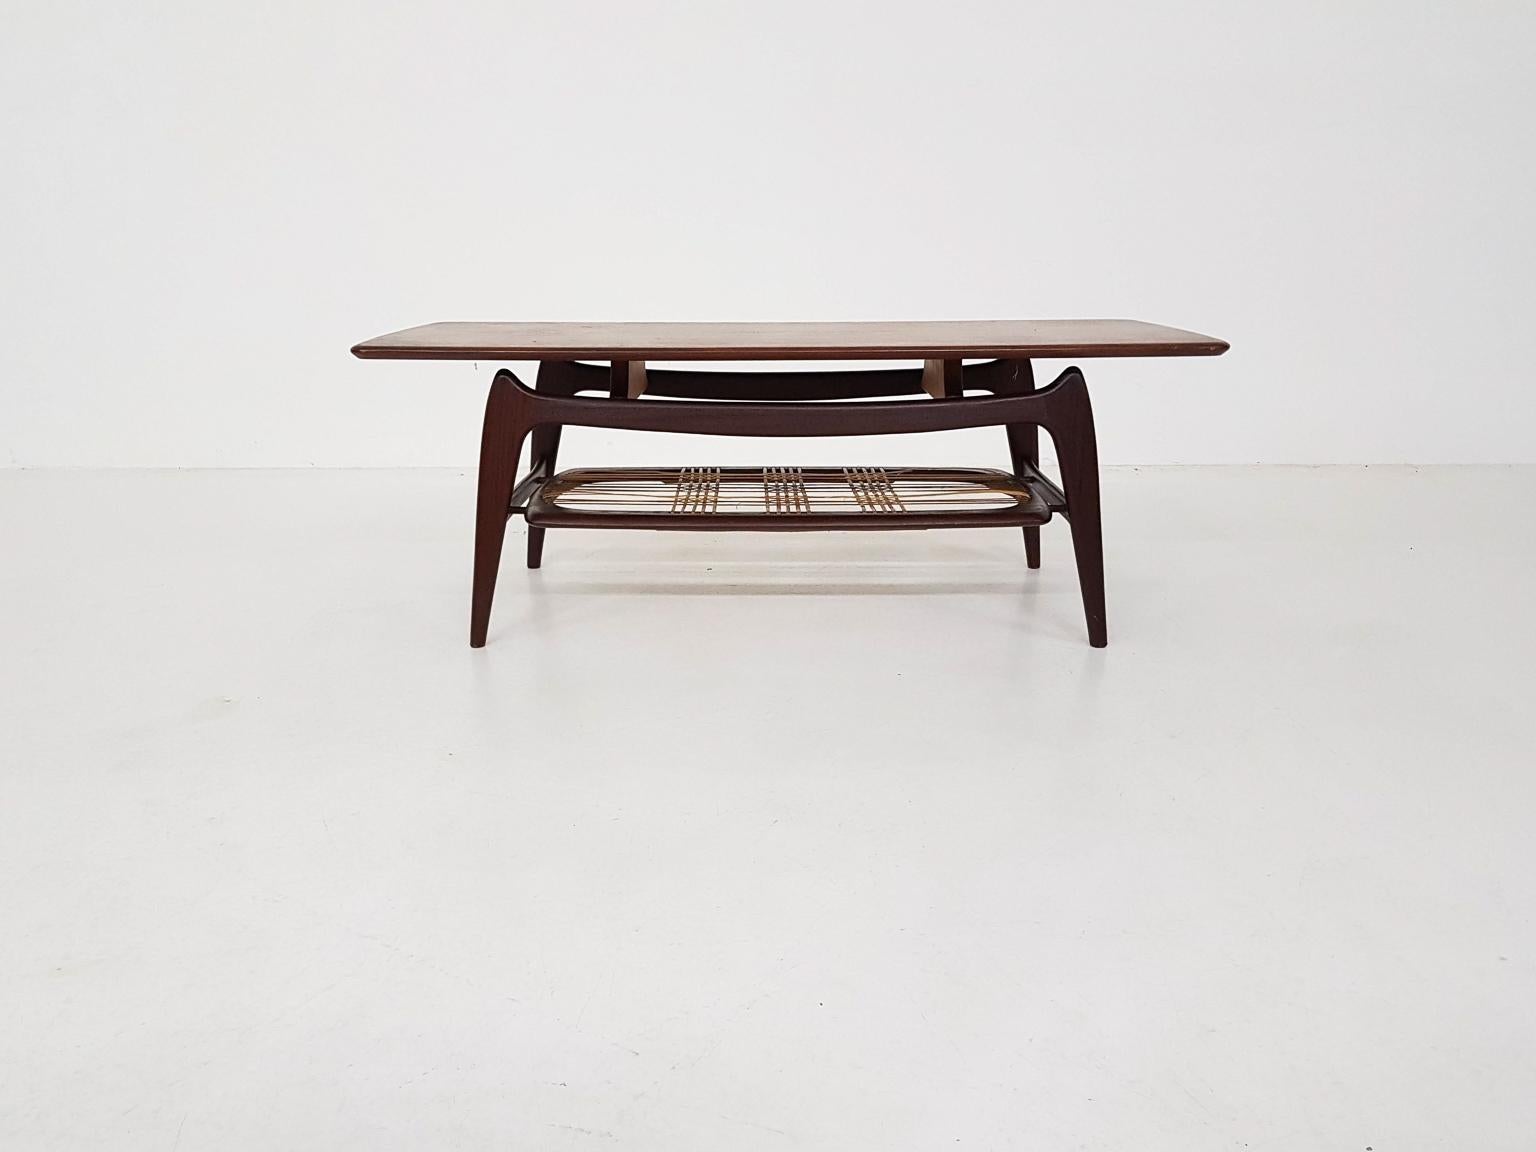 Teak coffee table with rattan magazine rack. Model Nr. 16.

Some rattan strings have been renewed.

These table is made by Wébé the Netherlands. Wébé was a Dutch furniture producer with Louis van Teeffelen as their most famous designer. Van